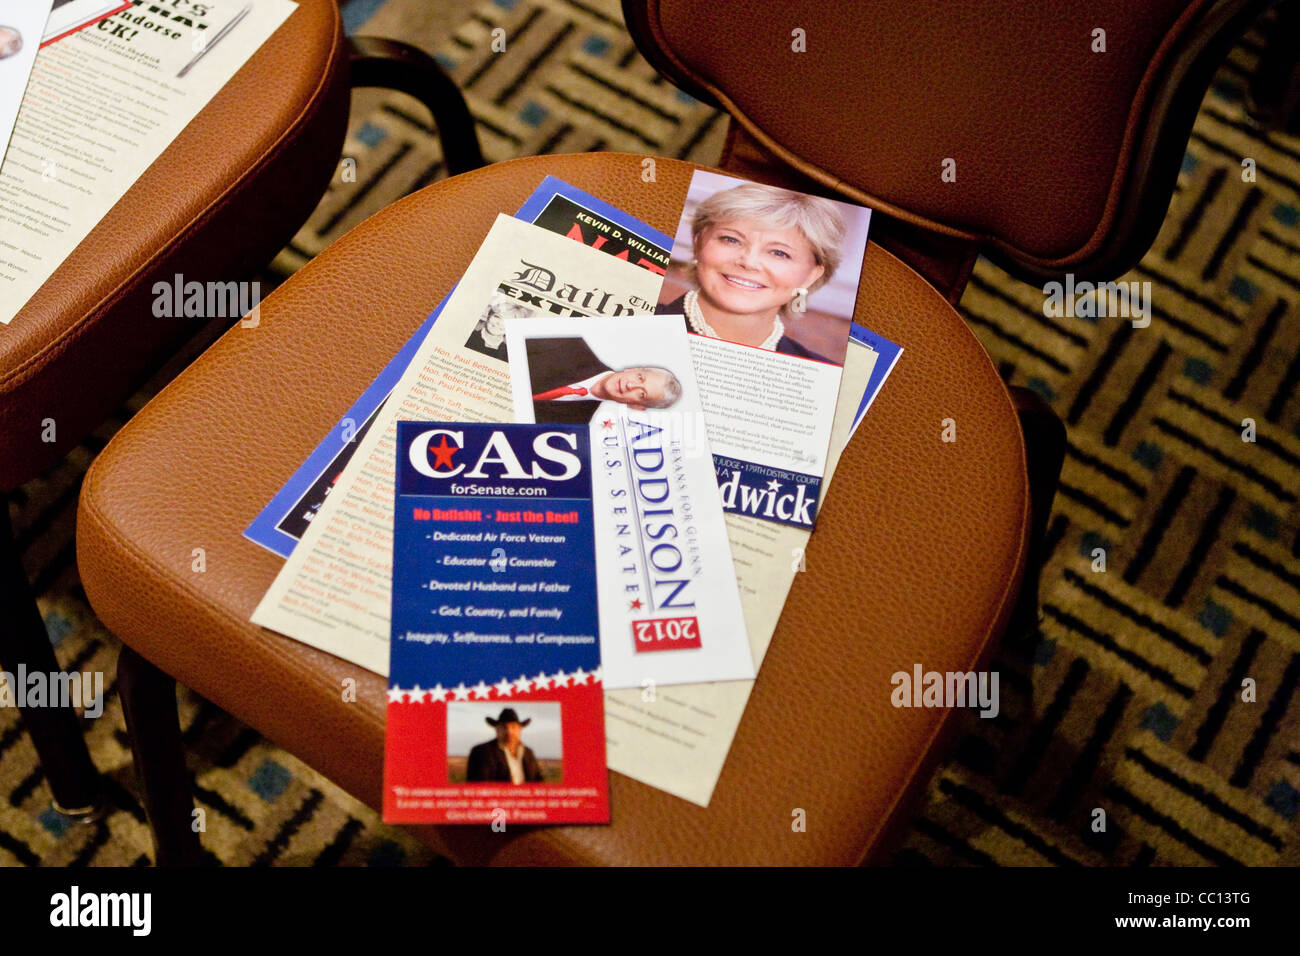 Flyers for several political candidates for United States Senate seat are placed on chair before debate in Houston, Texas Stock Photo